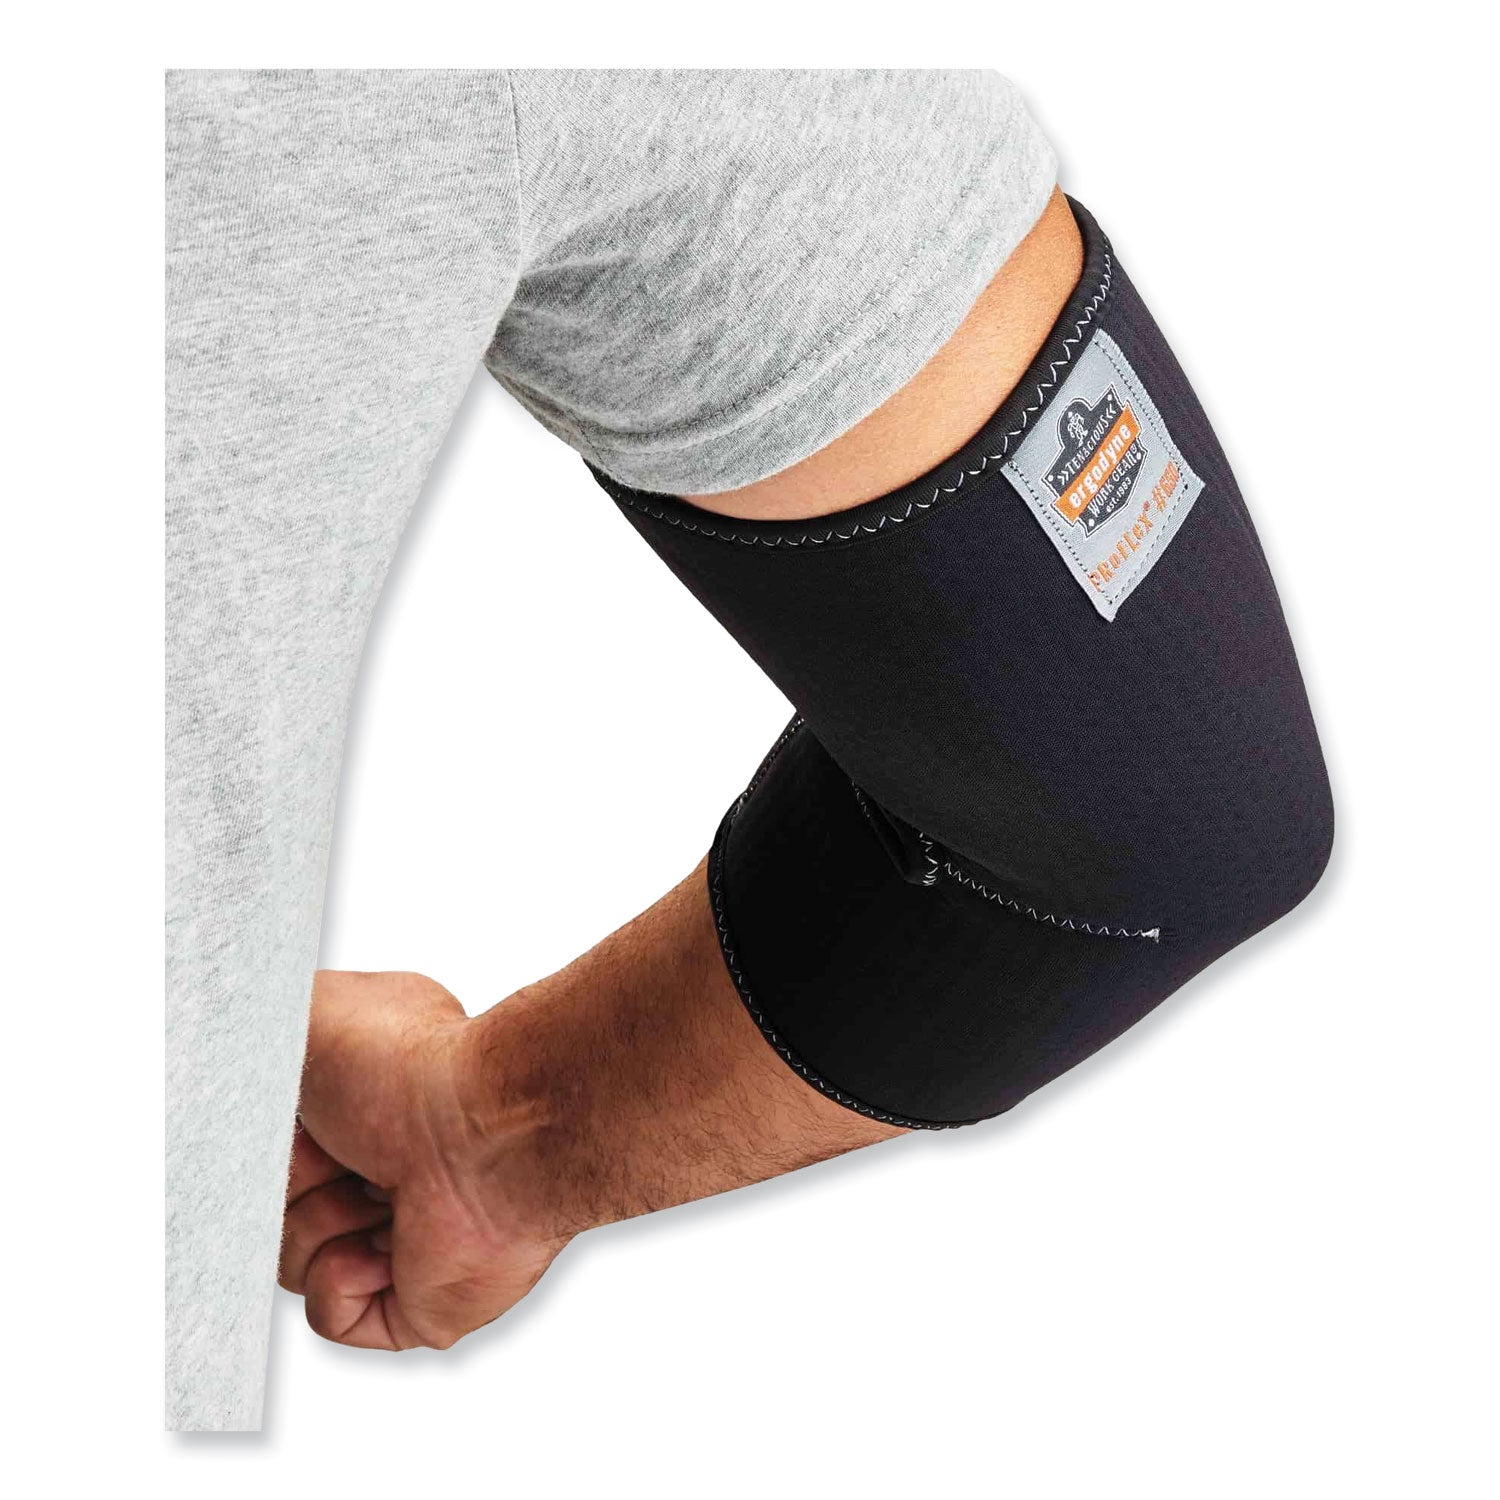 proflex-650-compression-arm-sleeve-small-black-ships-in-1-3-business-days_ego16572 - 3